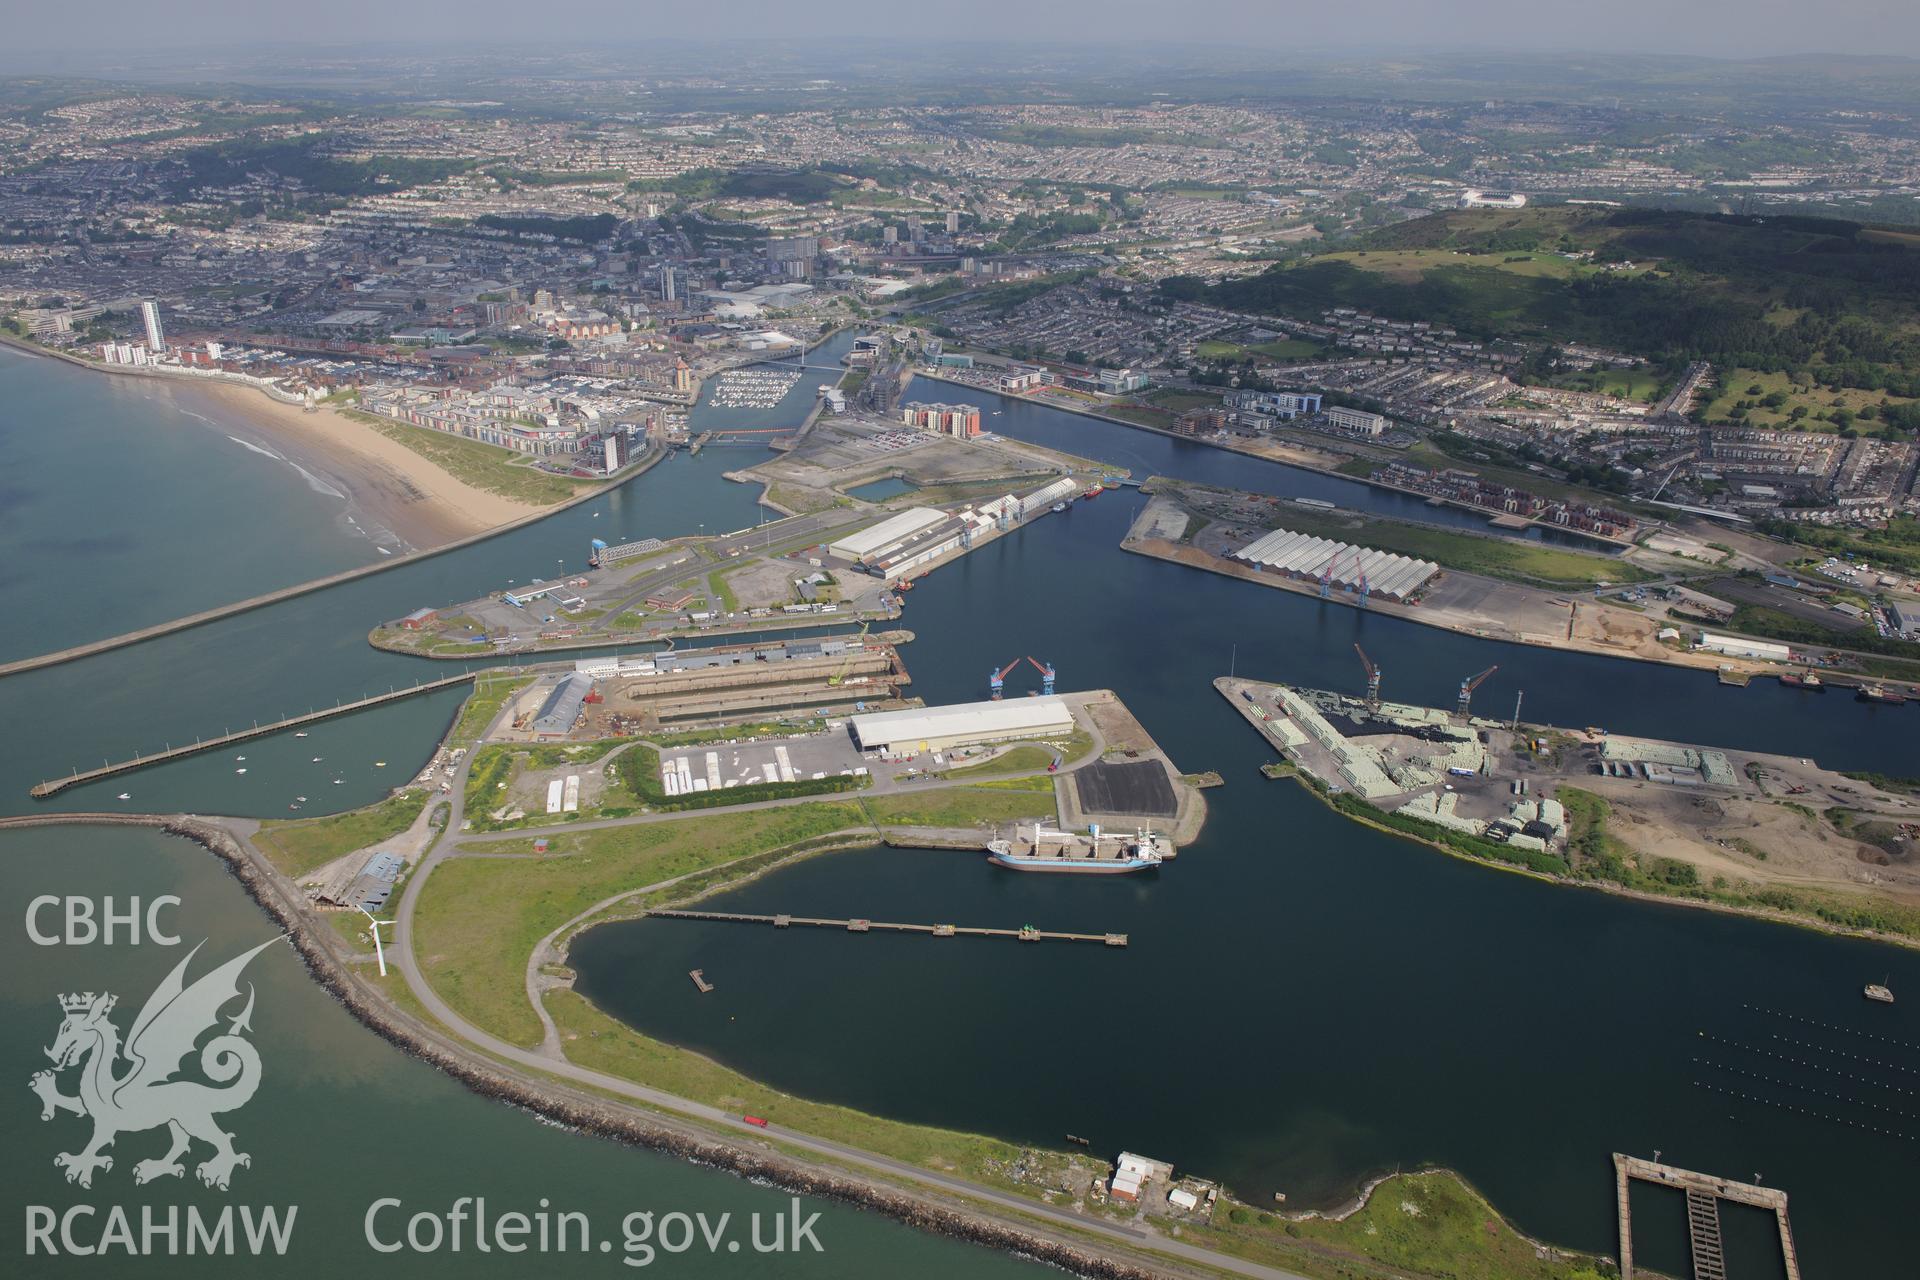 Swansea docks including the King's Dock, Queen's Dock and Prince of Wales Dock, with the city of Swansea in the background and Graigola Merthyr Patent Fuel Works in the foreground. Oblique aerial photograph taken during the Royal Commission's programme of archaeological aerial reconnaissance by Toby Driver on 19th June 2015.